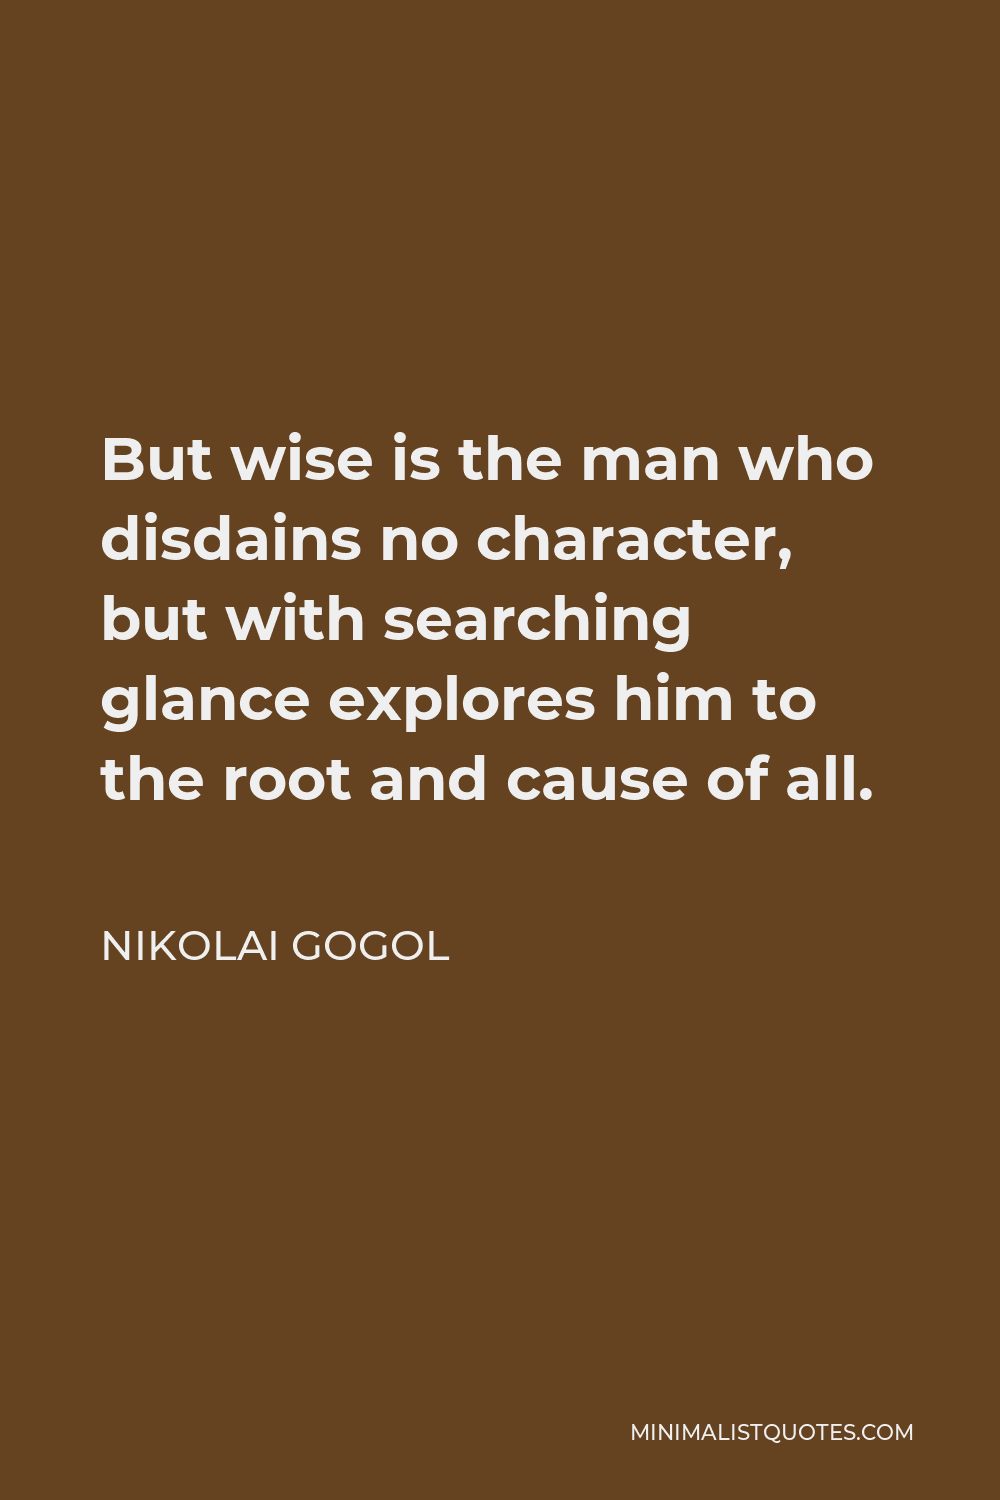 Nikolai Gogol Quote - But wise is the man who disdains no character, but with searching glance explores him to the root and cause of all.